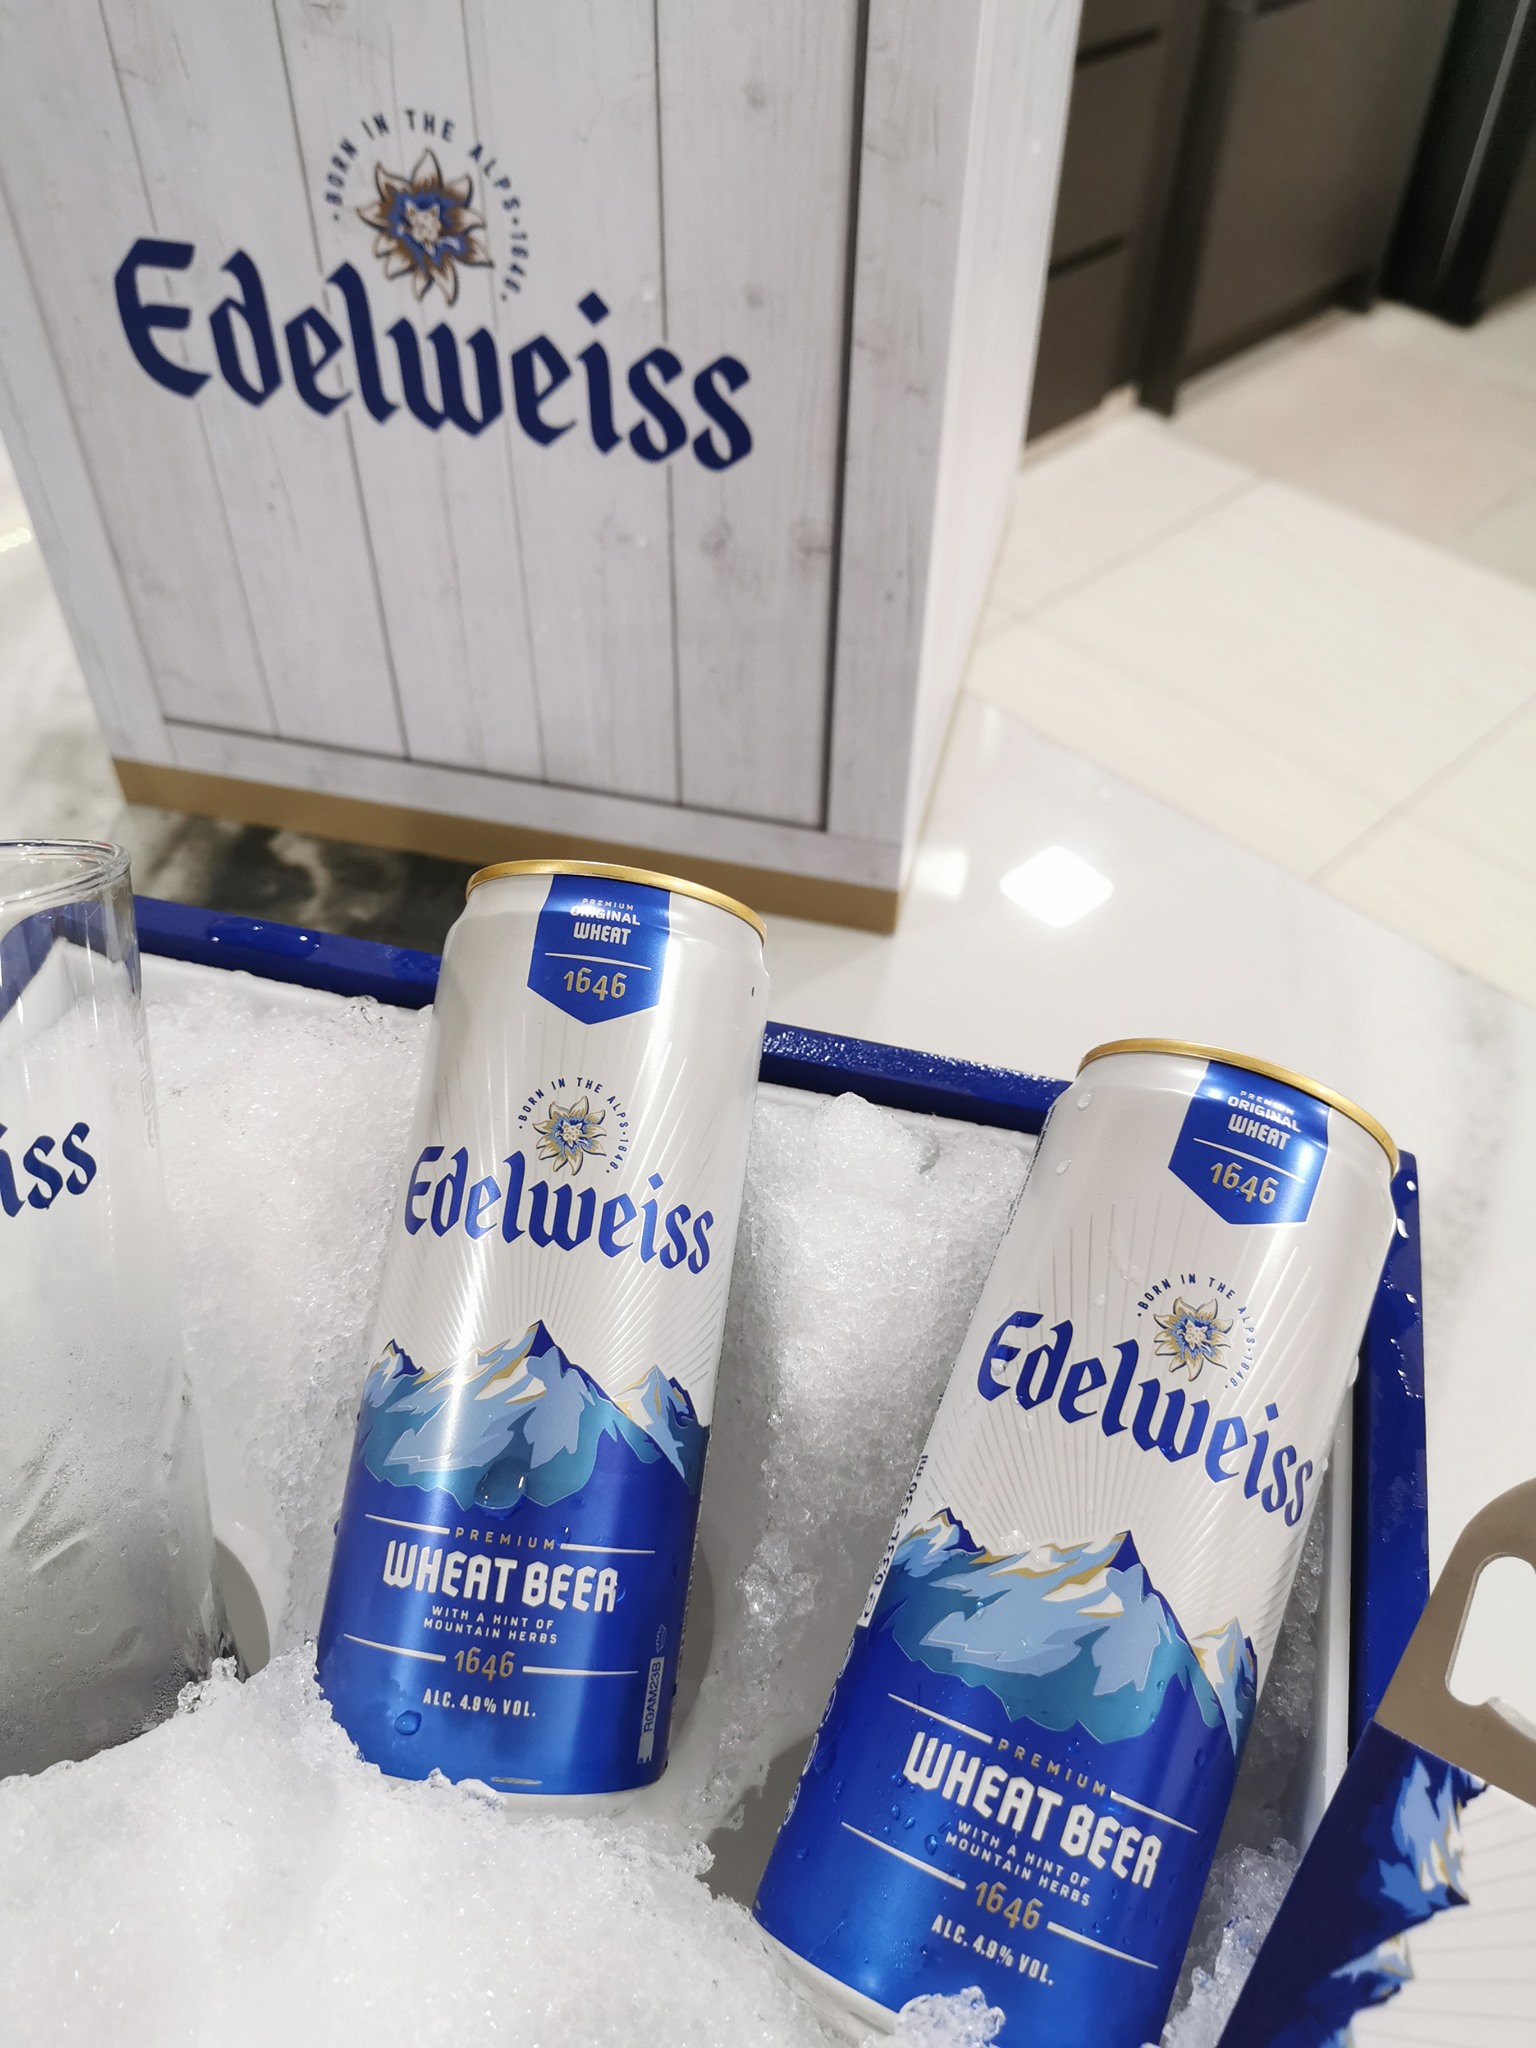 Edelweiss beer malaysia